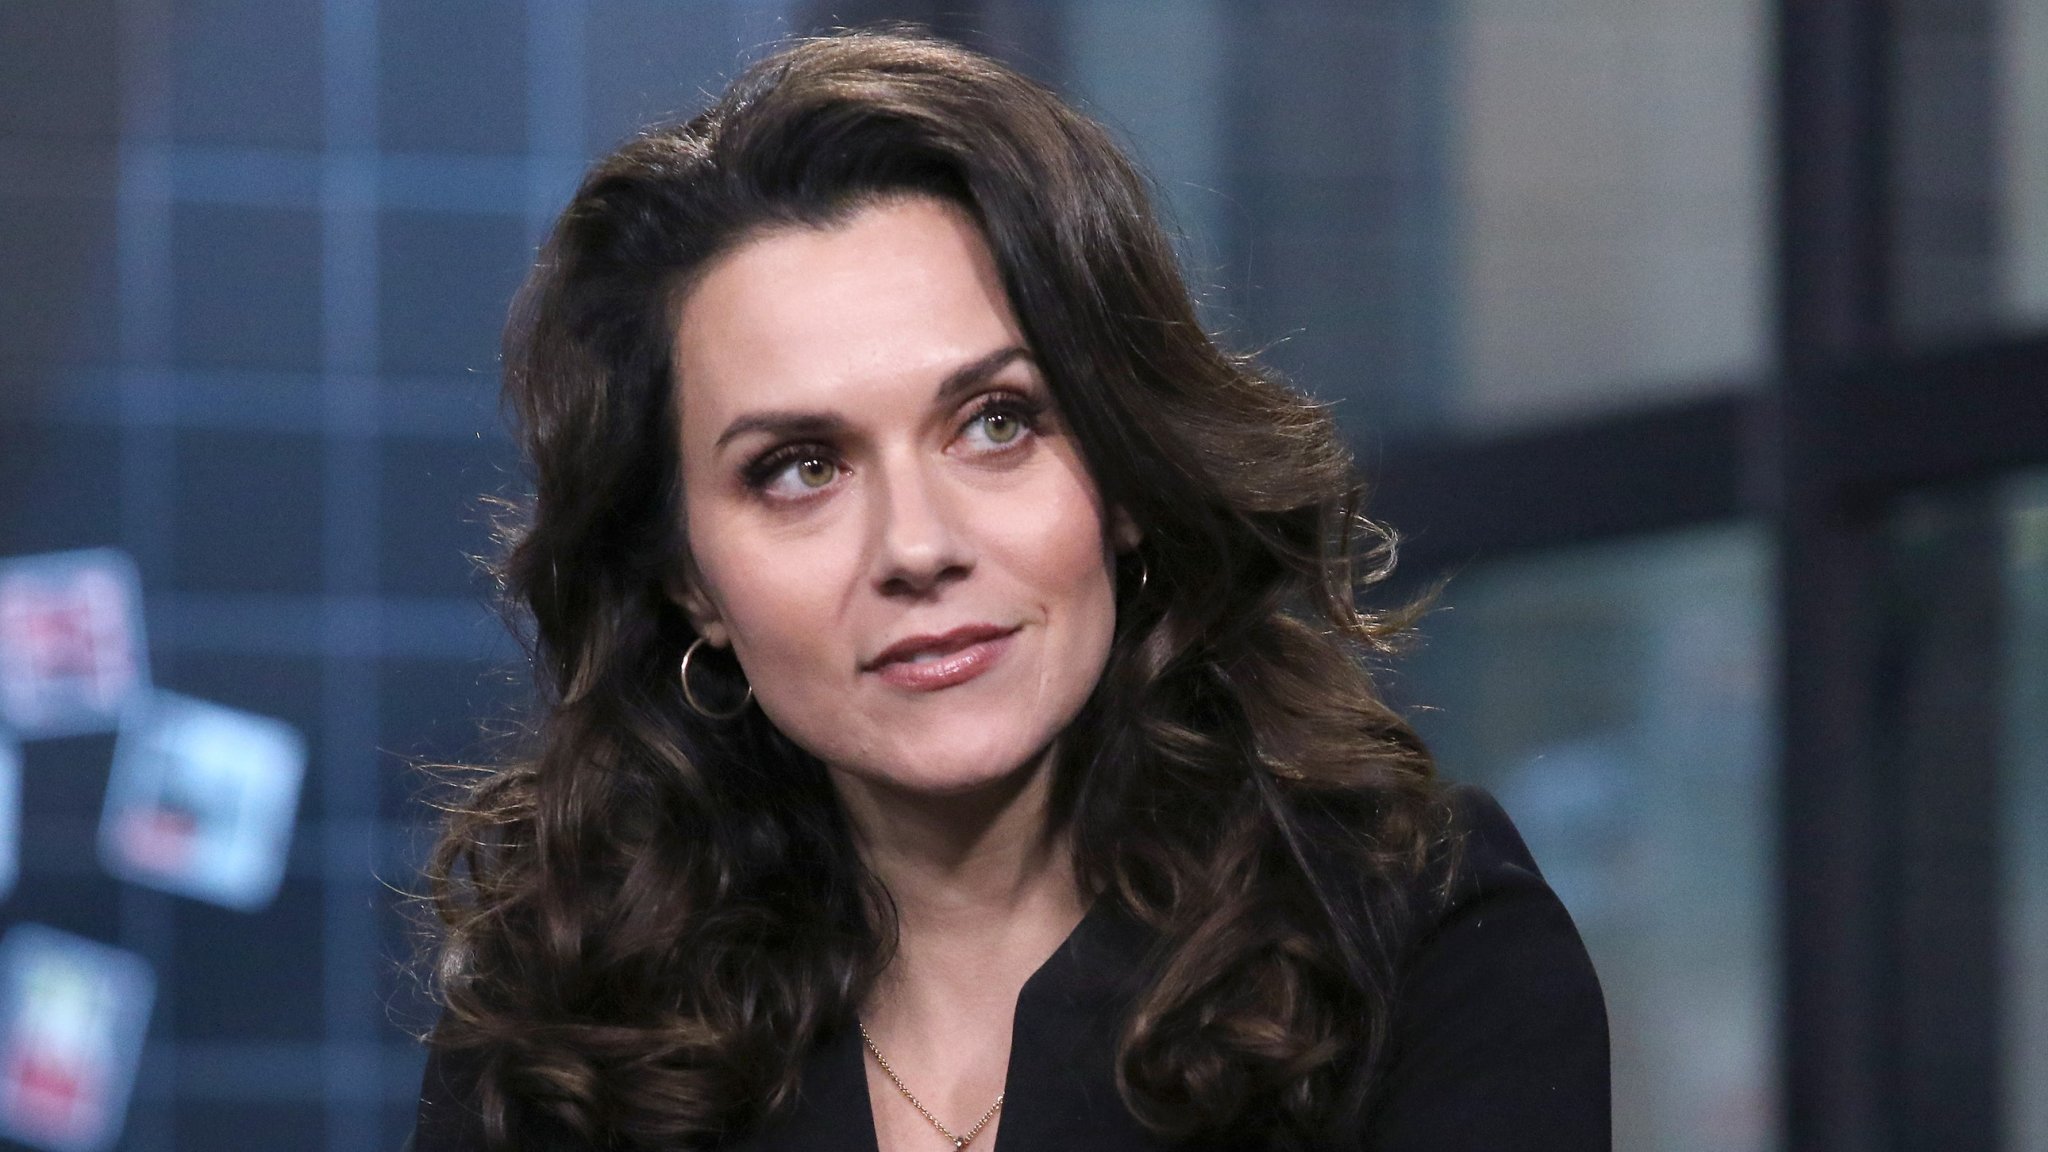 'One Tree Hill' Star Hilarie Burton Opened Up About Her Abortion in a Powerful Post